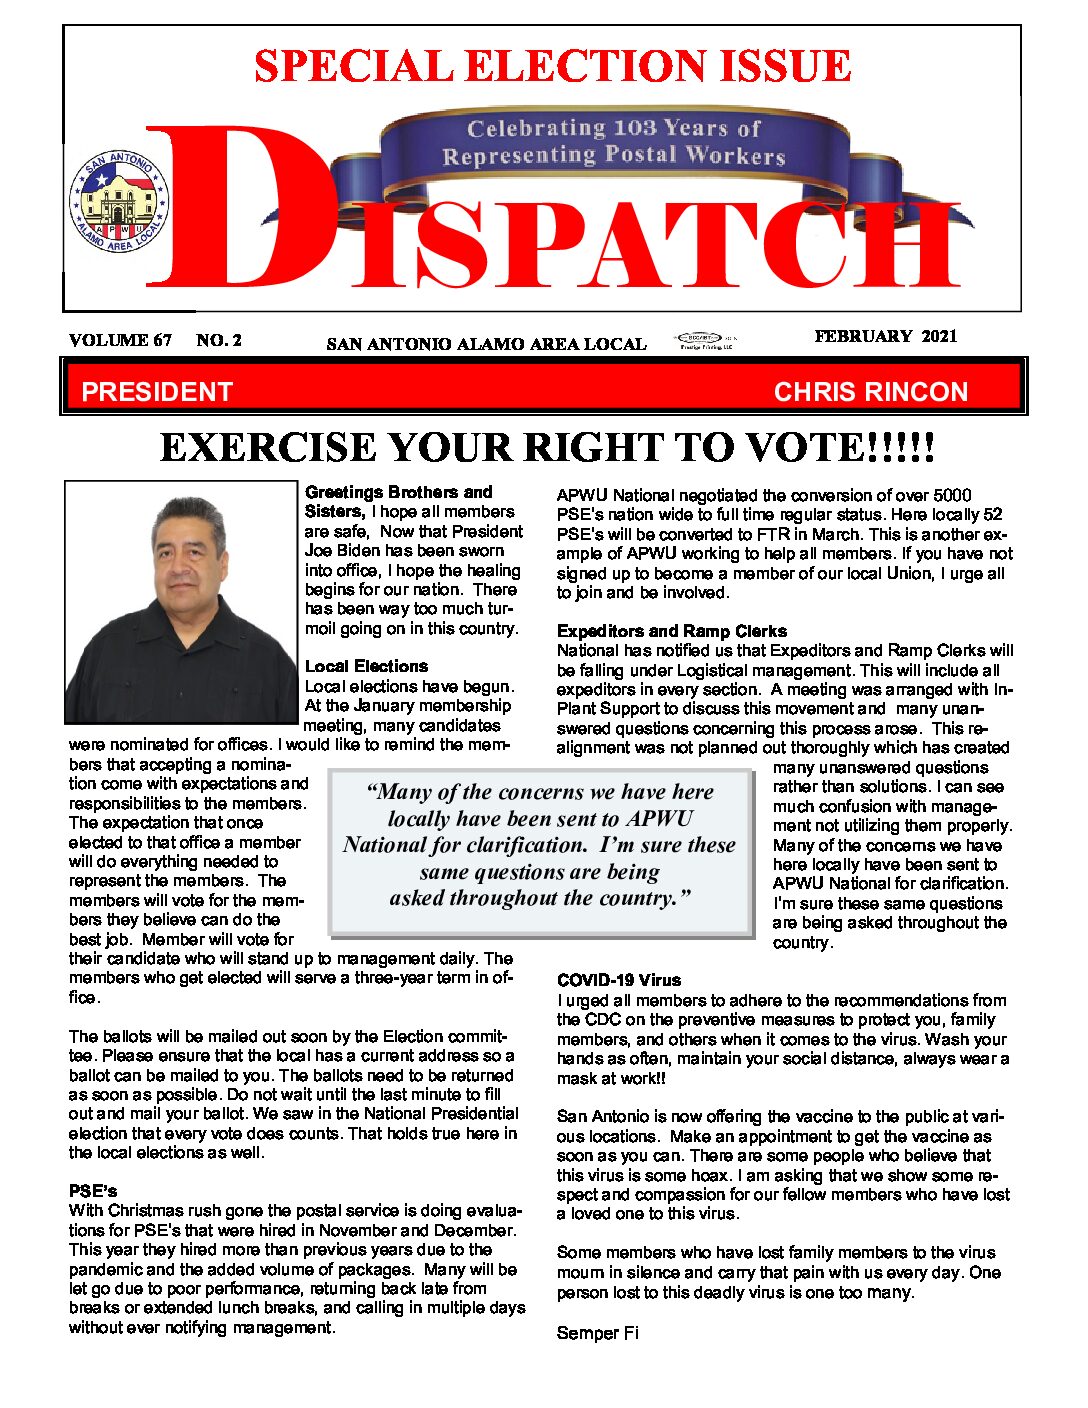 February Election Issue ’21 - 